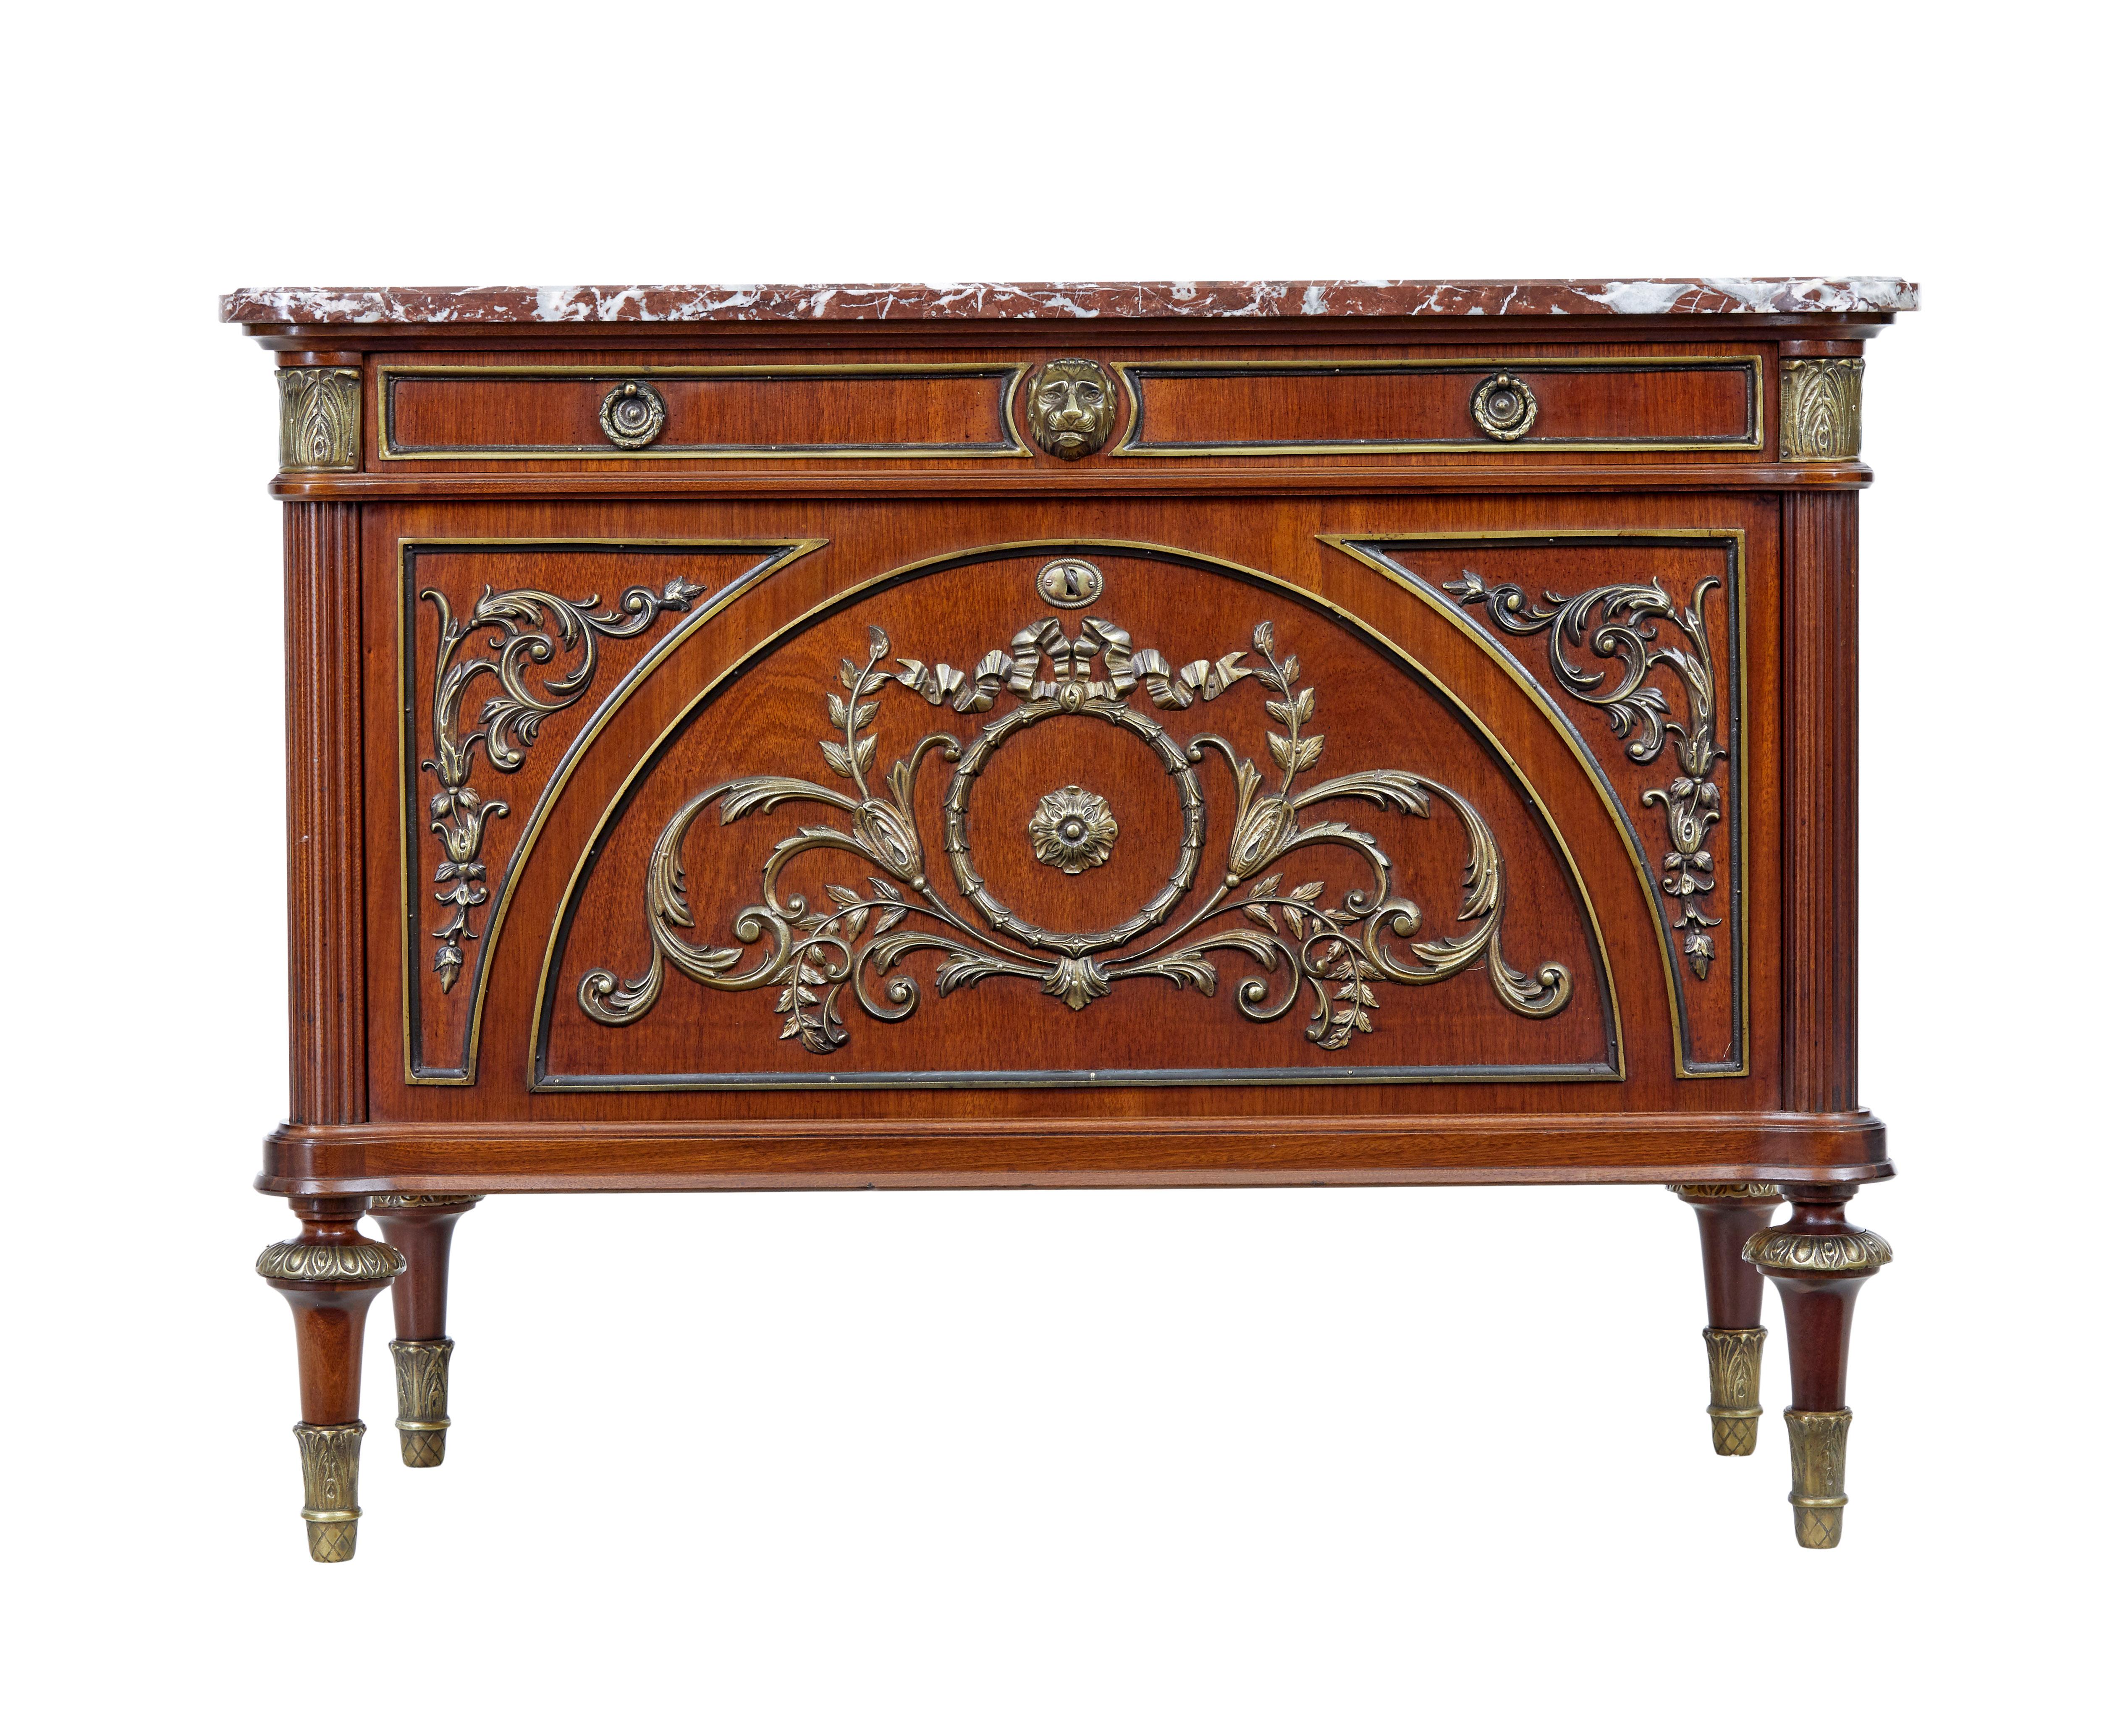 Fine quality 1960s ormolu, mahogany and marble top commode.

Single drawer below the top, with a drop down front that conceals 2 fitted drawers. Beautifully applied ormolu and brass decoration. Fluted columns to the sides.

Marble top is loose